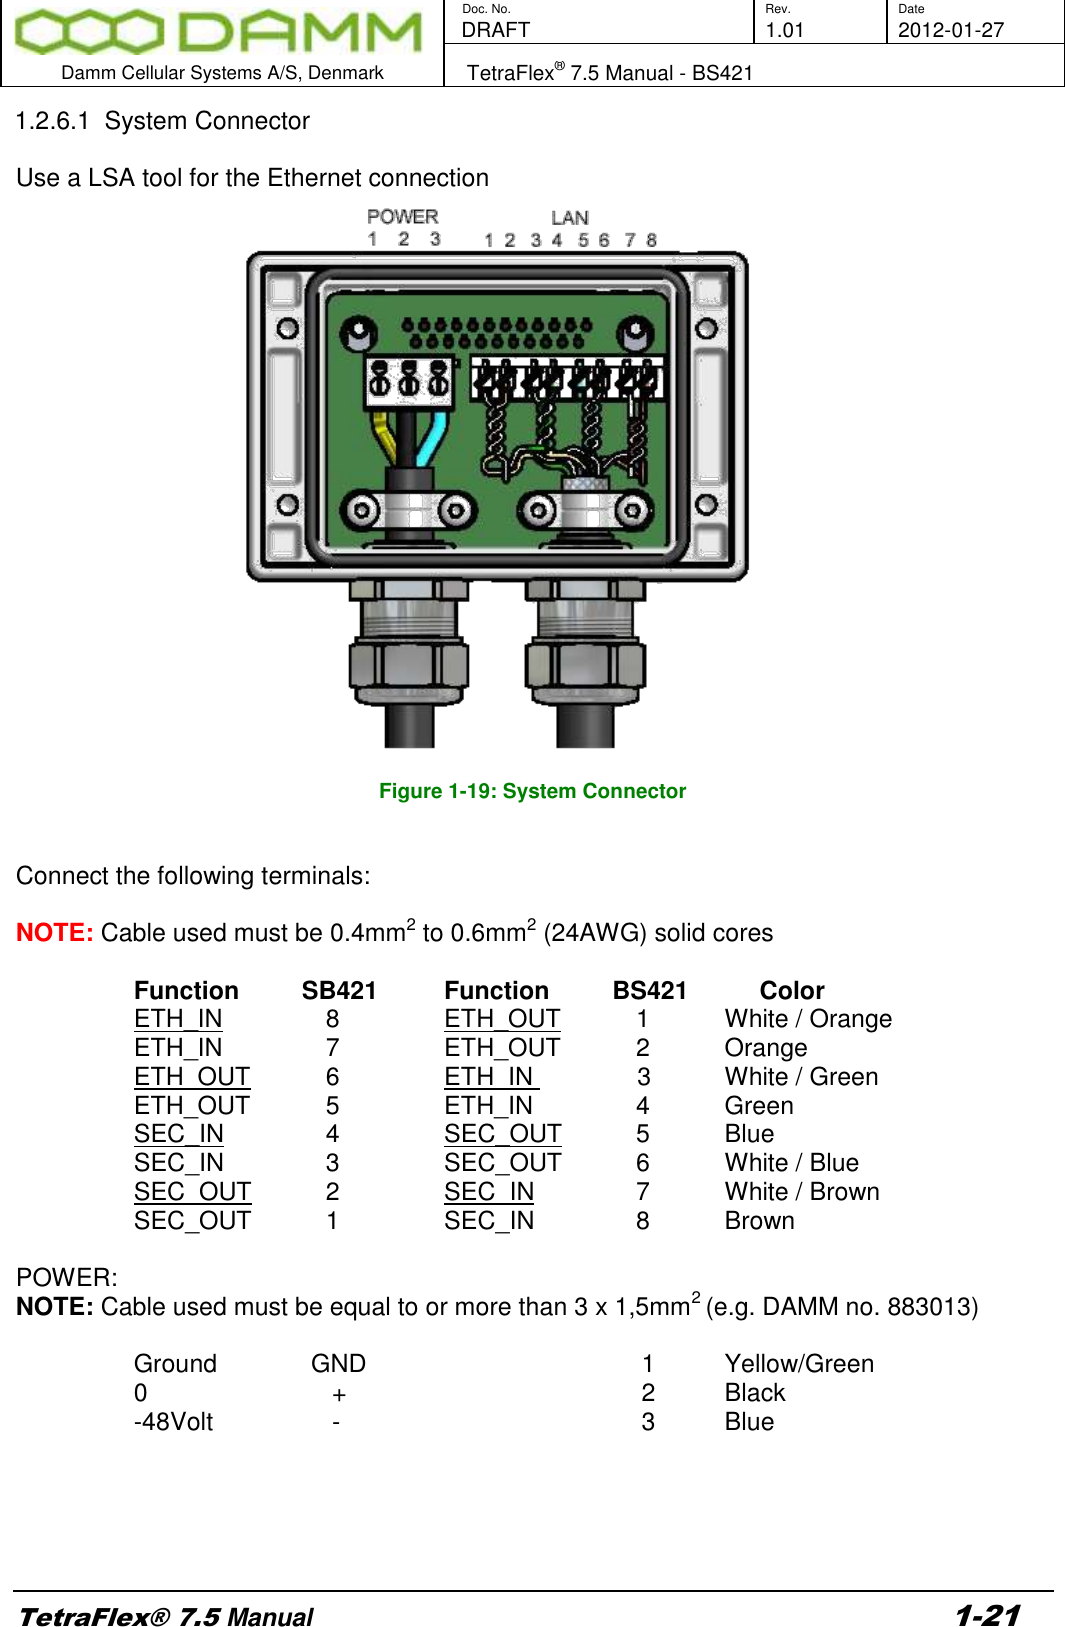        Doc. No. Rev. Date    DRAFT  1.01 2012-01-27  Damm Cellular Systems A/S, Denmark   TetraFlex® 7.5 Manual - BS421  TetraFlex® 7.5 Manual 1-21 1.2.6.1  System Connector  Use a LSA tool for the Ethernet connection  Figure 1-19: System Connector   Connect the following terminals:  NOTE: Cable used must be 0.4mm2 to 0.6mm2 (24AWG) solid cores  Function         SB421  Function         BS421        Color ETH_IN  8  ETH_OUT  1    White / Orange ETH_IN               7  ETH_OUT  2    Orange ETH_OUT  6  ETH_IN               3    White / Green ETH_OUT  5   ETH_IN               4    Green SEC_IN  4  SEC_OUT  5    Blue SEC_IN  3   SEC_OUT  6    White / Blue SEC_OUT  2  SEC_IN  7    White / Brown SEC_OUT  1  SEC_IN  8    Brown  POWER: NOTE: Cable used must be equal to or more than 3 x 1,5mm2 (e.g. DAMM no. 883013)  Ground    GND              1   Yellow/Green 0         +               2   Black -48Volt       -               3   Blue      